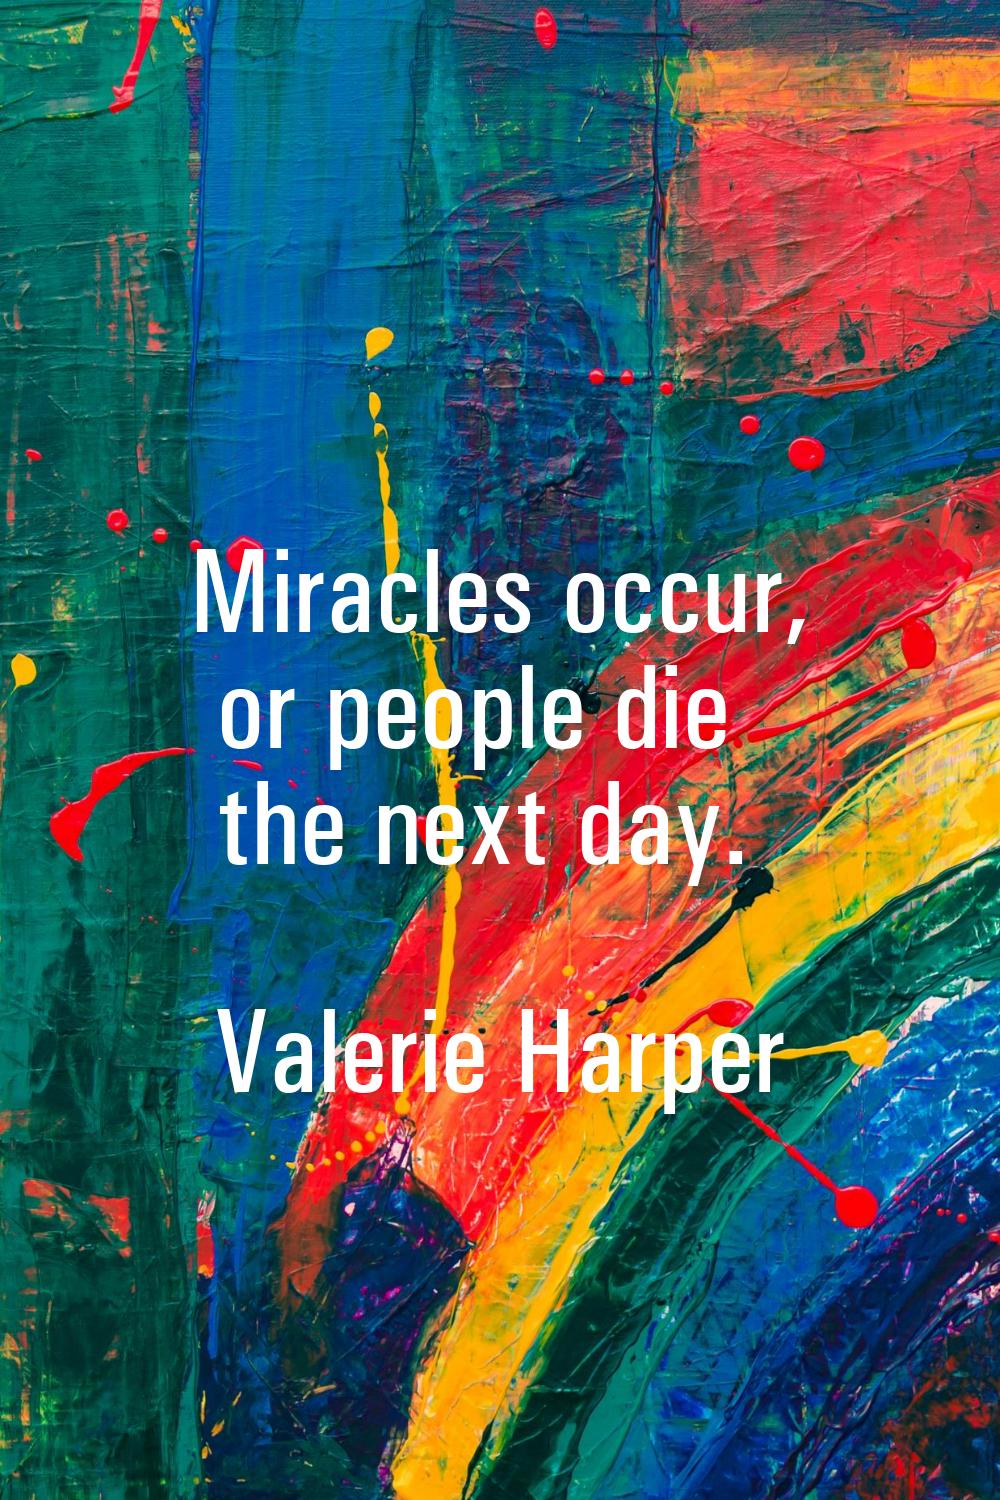 Miracles occur, or people die the next day.